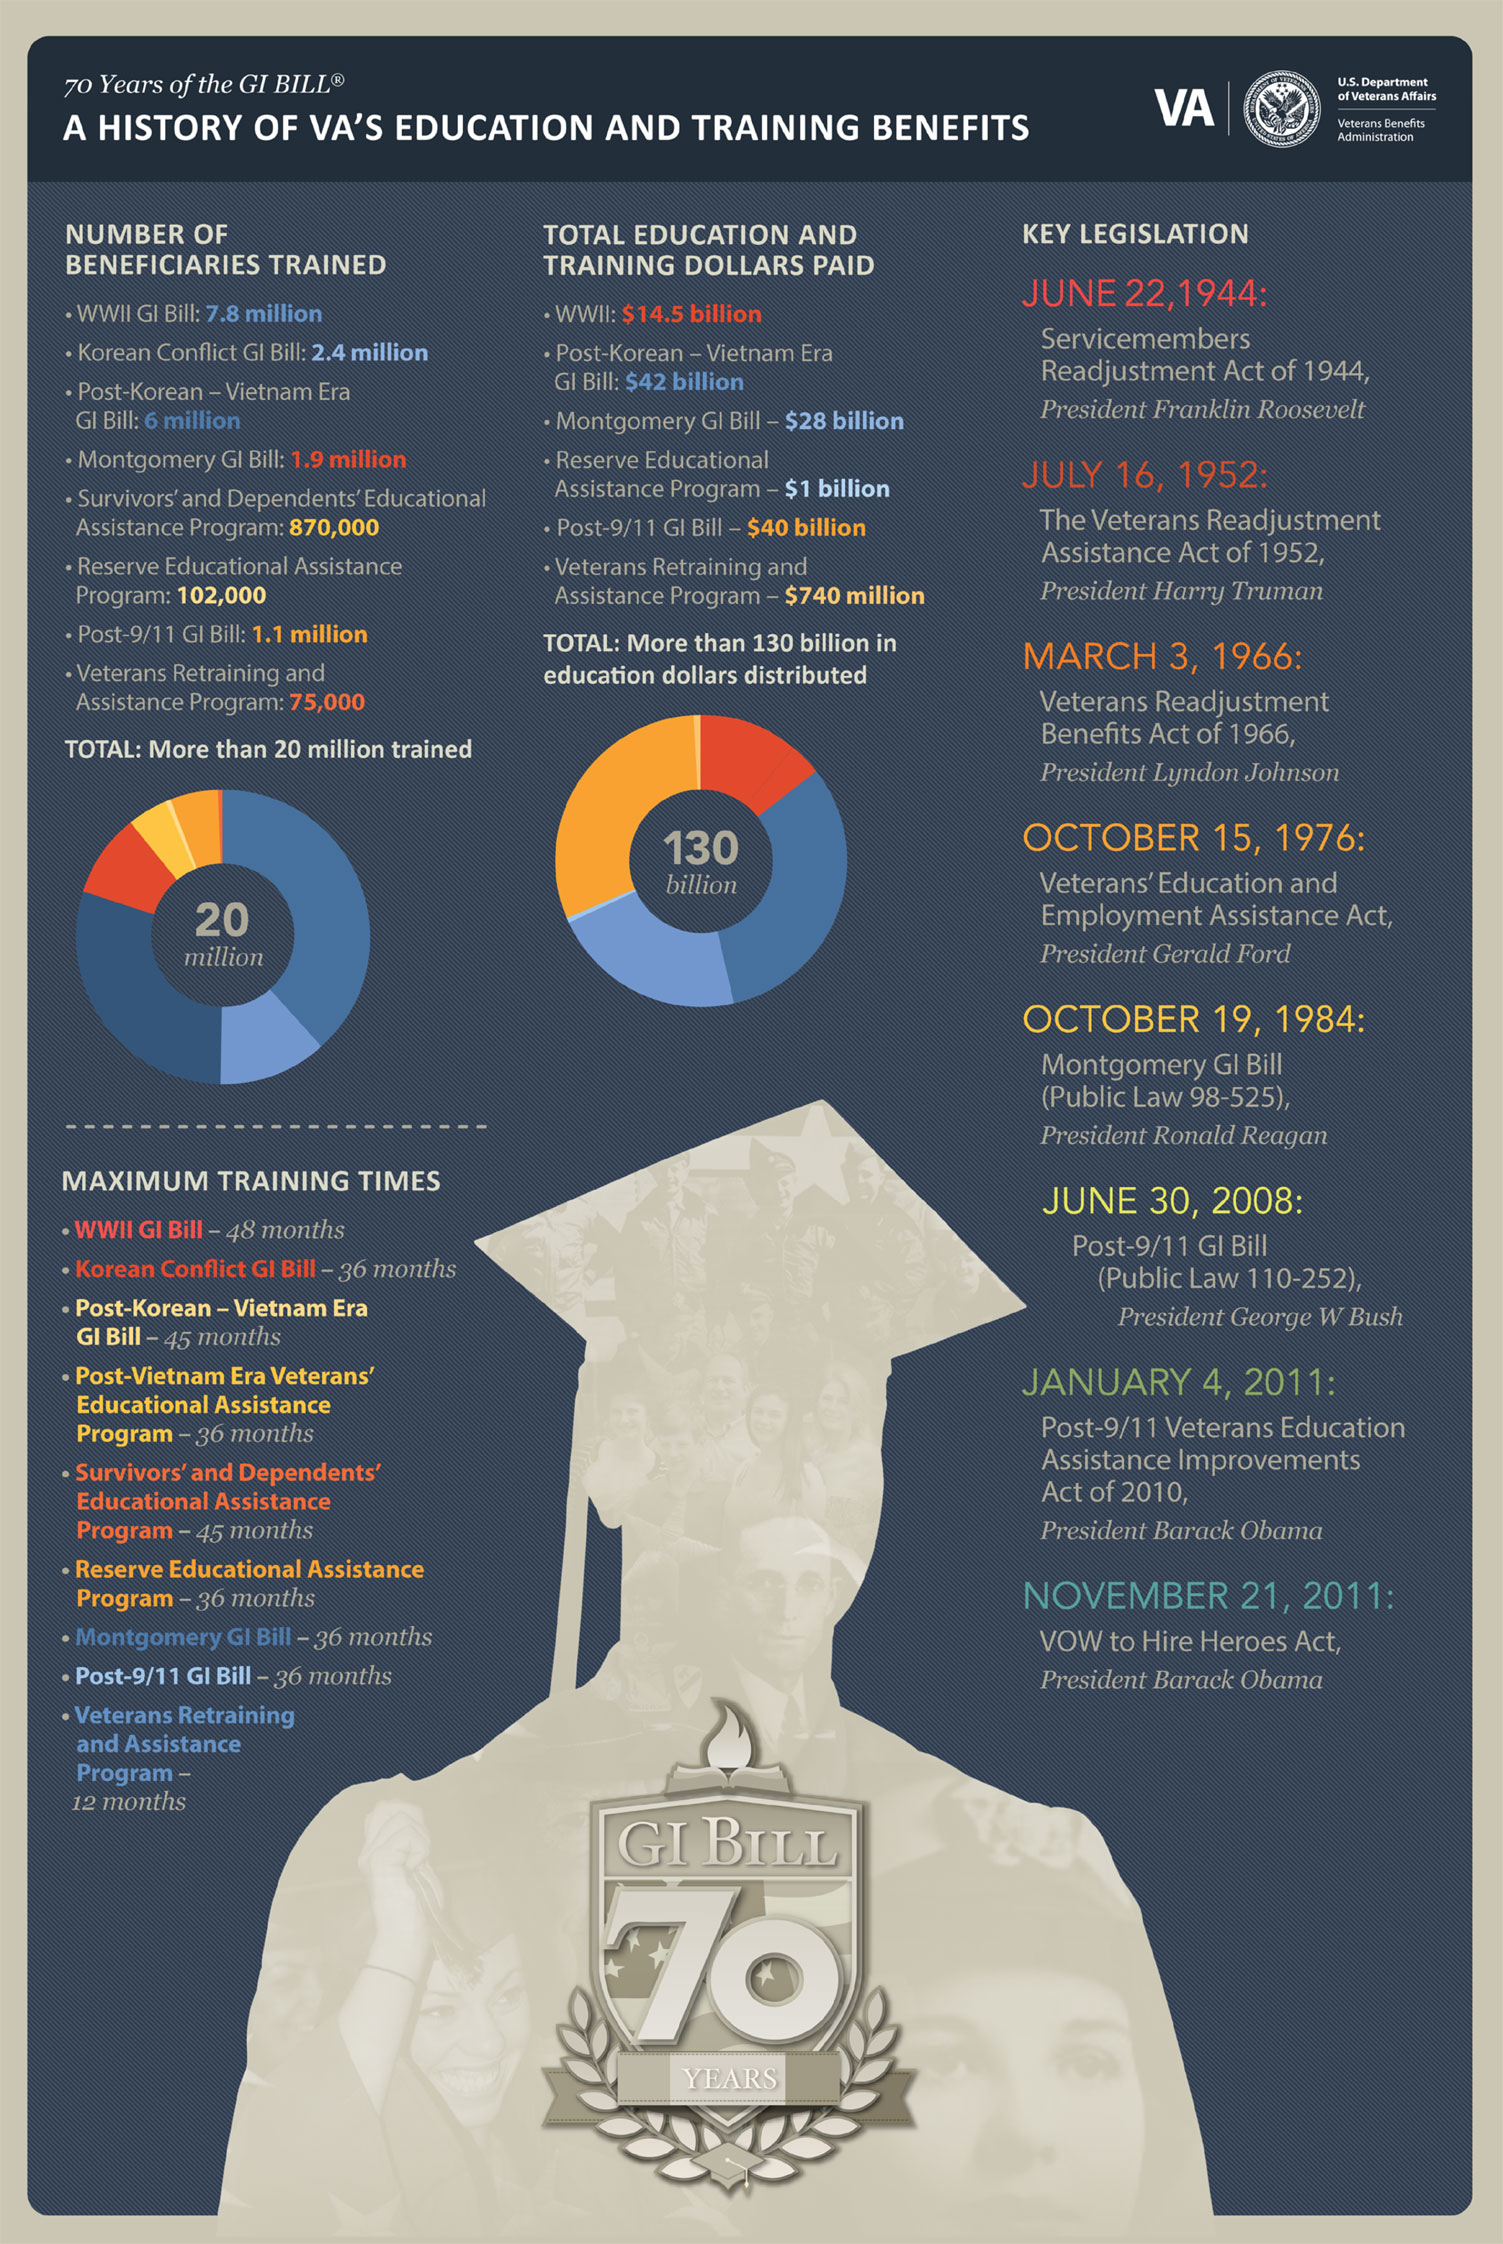 70 Years of the GI BILL® 
A History of VA's Education and Training Benefits

Number of Beneficiaries Trained

• WWII GI Bill: 7.8 million 
• Korean Conflict GI Bill: 2.4 million
• Post-Korean – Vietnam Era GI Bill: 6 million
• Montgomery GI Bill: 1.9 million
• Survivors' and Dependents' Educational Assistance Program: 870,000  
• Reserve Educational Assistance Program: 102,000  
• Post-9/11 GI Bill: 1.1 million 
• Veterans Retraining and Assistance Program: 75,000
TOTAL: More than 20 million trained


Total Education and Training Dollars Paid

• WWII: $14.5 billion 
• Post-Korean – Vietnam Era GI Bill: $42 billion
• Montgomery GI Bill – $28 billion 
• Reserve Educational Assistance Program – $1 billion 
• Post-9/11 GI Bill – $40 billion 
• Veterans Retraining and Assistance Program – $740 million 
TOTAL: More than 130 billion in education dollars distributed


Maximum Training Times

• WWII GI Bill – 48 months
• Korean Conflict GI Bill – 36 months
• Post-Korean – Vietnam Era GI Bill – 45 months
• Post-Vietnam Era Veterans' Educational Assistance Program – 36 months 
• Survivors' and Dependents' Educational Assistance Program – 45 months
• Reserve Educational Assistance Program – 36 months
• Montgomery GI Bill – 36 months
• Post-9/11 GI Bill – 36 months
• Veterans Retraining and Assistance Program – 12 months

Key Legislation

June 22, 1944:
Servicemembers Readjustment Act of 1944, President Franklin Roosevelt 

July 16, 1952:
The Veterans Readjustment Assistance Act of 1952, President Harry Truman

March 3, 1966:
Veterans Readjustment Benefits Act of 1966, President Lyndon Johnson

October 15, 1976:
Veterans' Education and Employment Assistance Act, President Gerald Ford  

October 19, 1984:
Montgomery GI Bill (Public Law 98-525), President Ronald Reagan 

June 30, 2008:
Post-9/11 GI Bill (Public Law 110-252), President George W Bush 

January 4, 2011:
Post-9/11 Veterans Education Assistance Improvements Act of 2010, President Barack Obama

November 21, 2011:
VOW to Hire Heroes Act, President Barack Obama